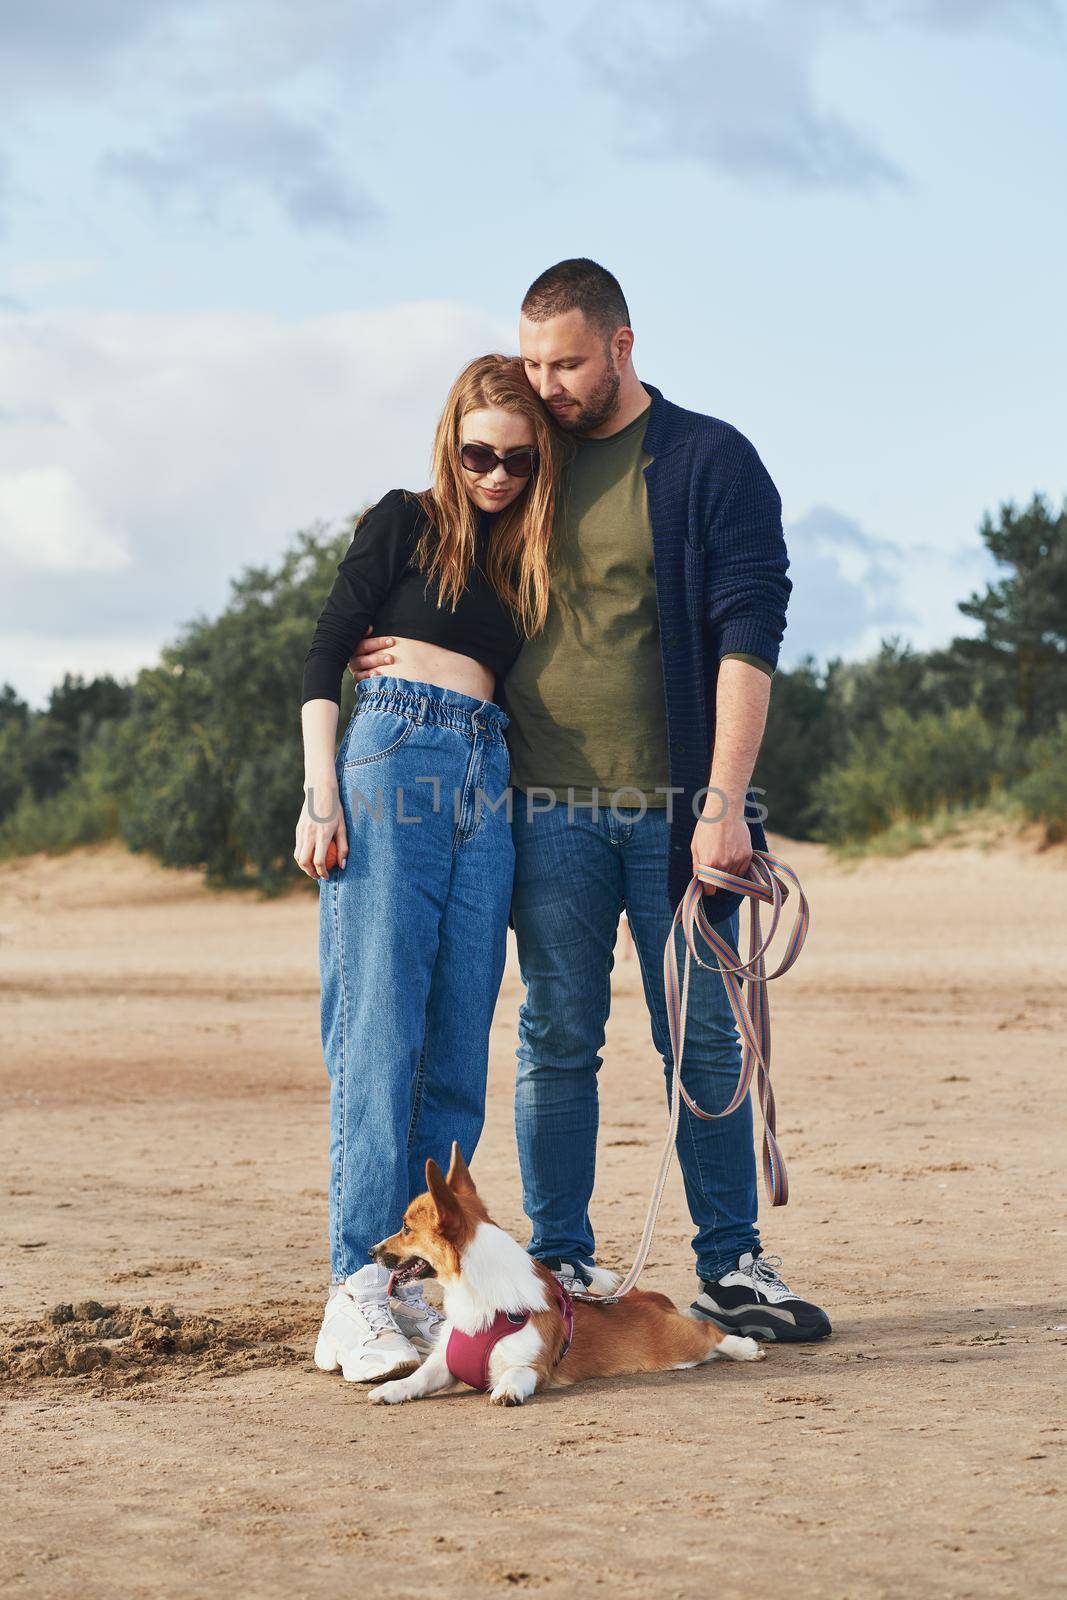 Young happy couple and dog standing on beach against pines and sand. Handsome man gently hugging woman while holding Corgi puppy on leash. Walking in summer nature of people in love